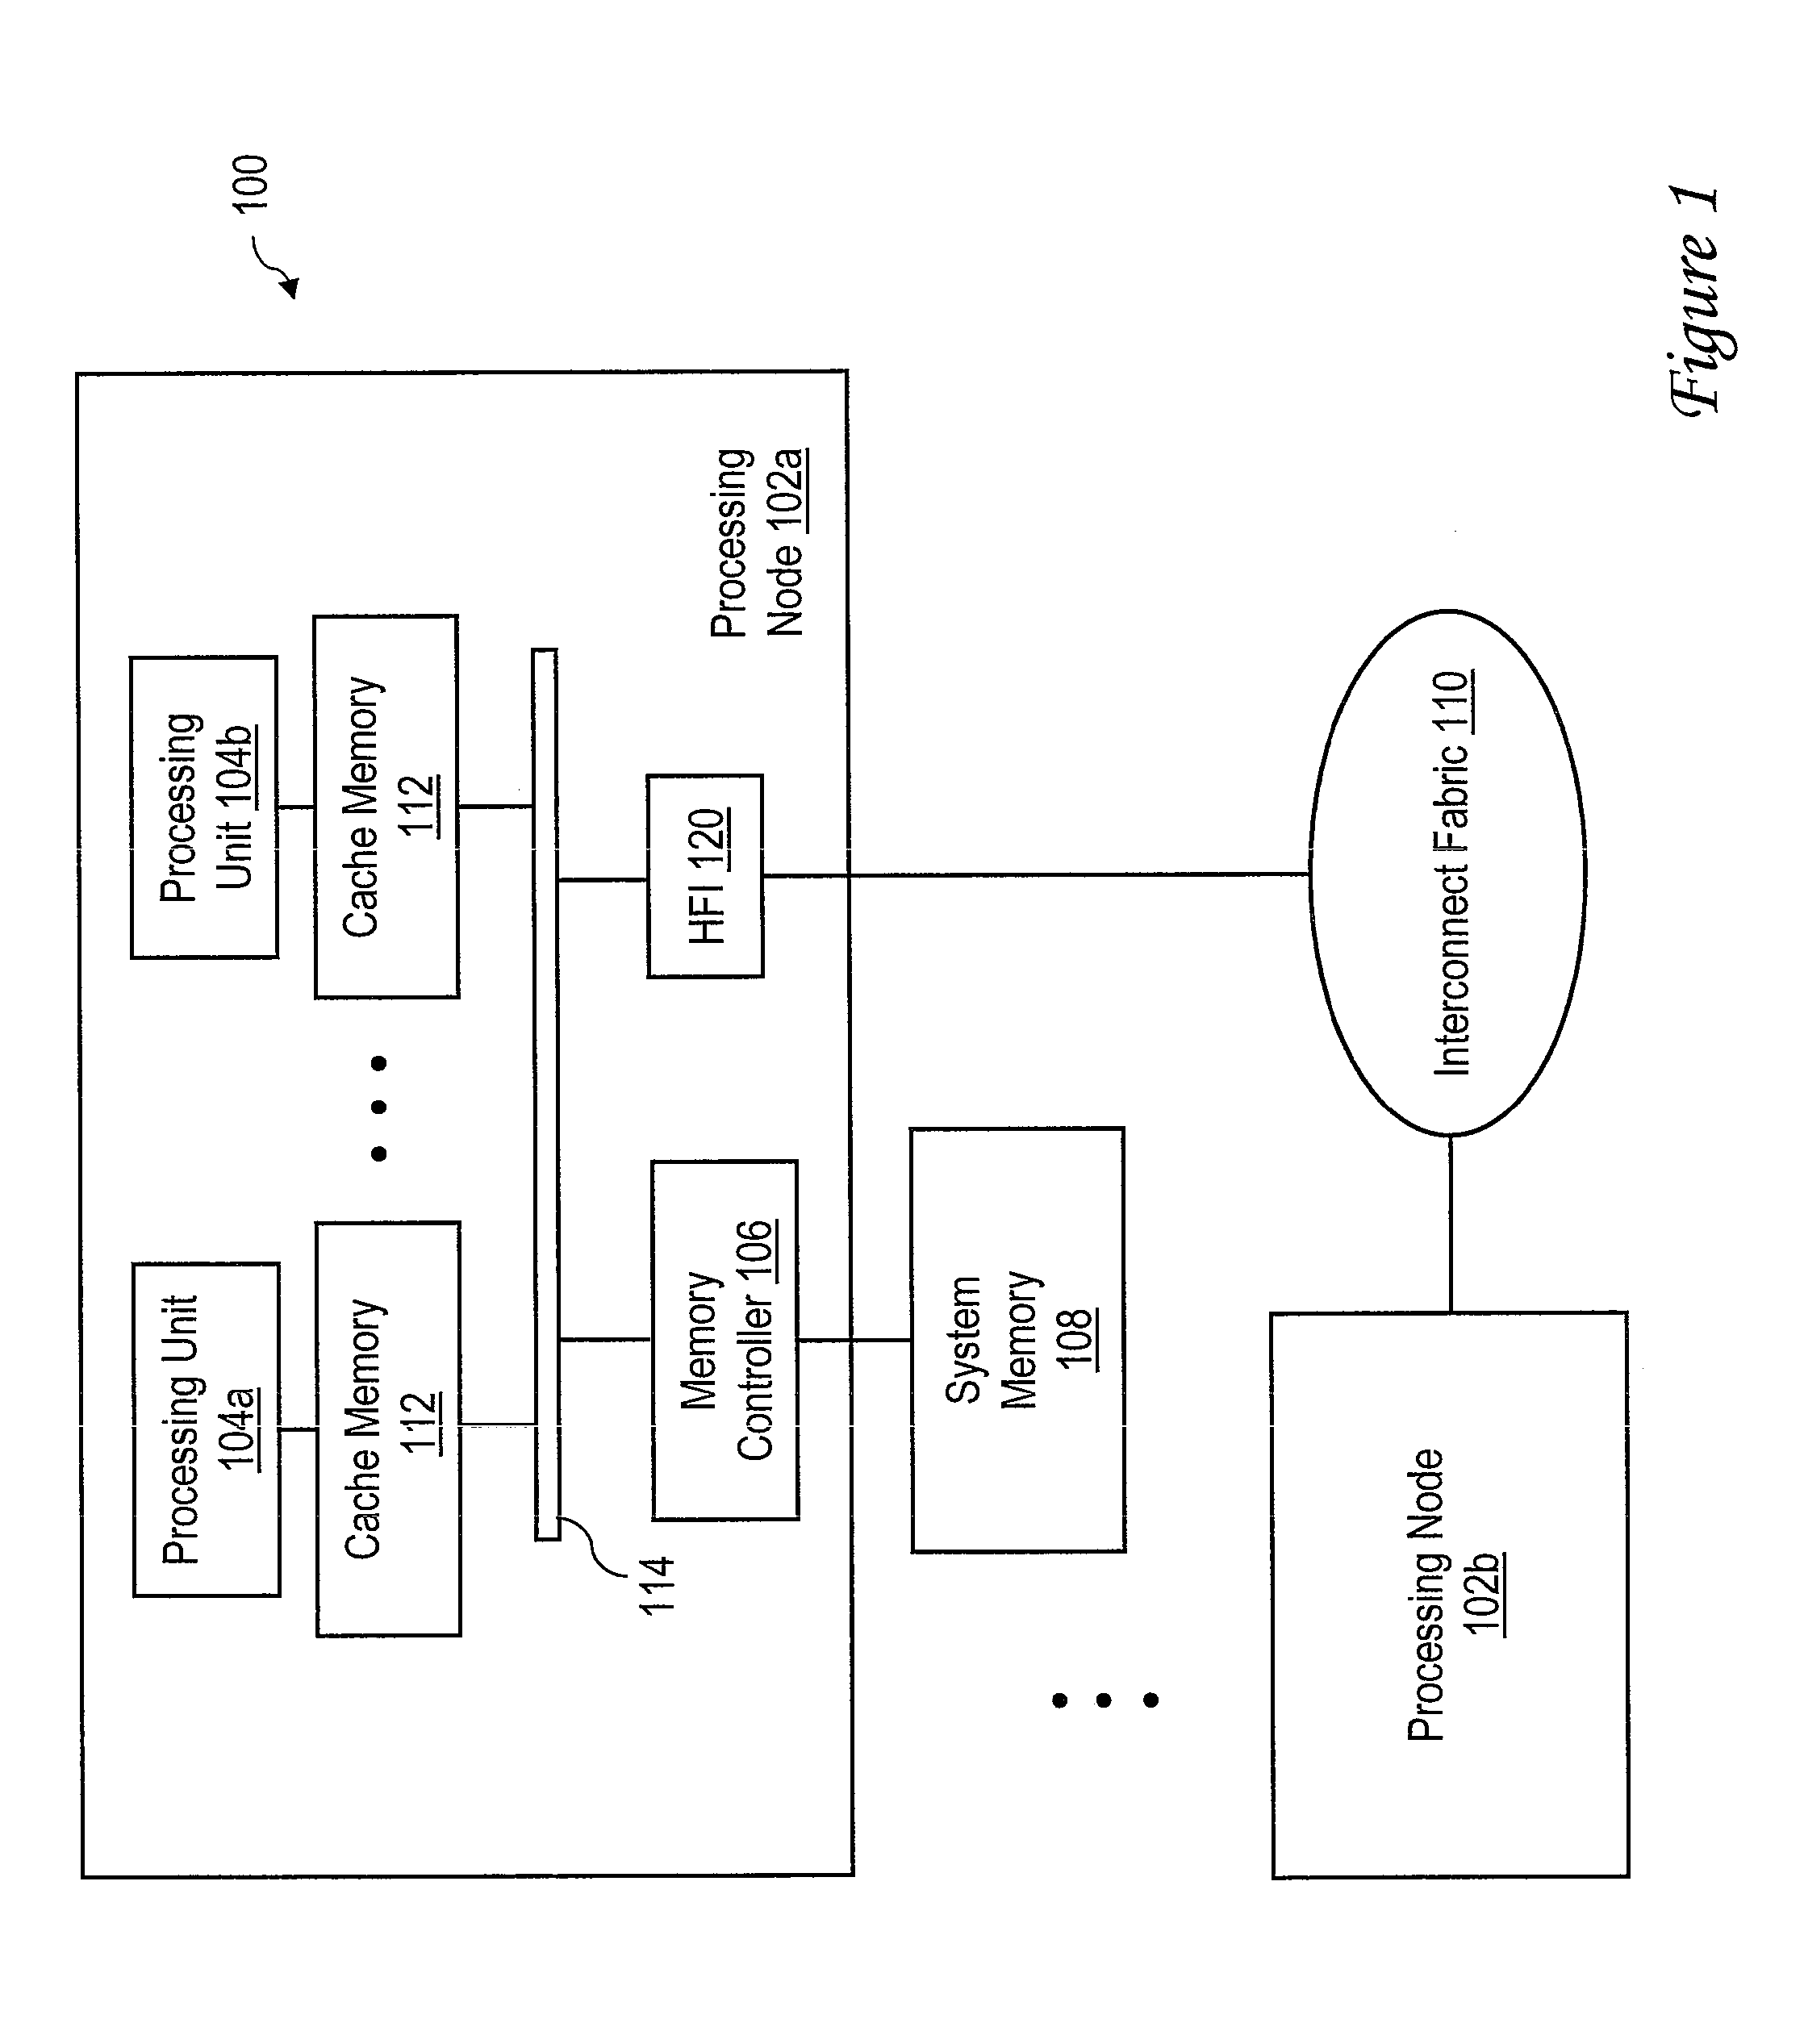 Method, System and Program Product for Allocating a Global Shared Memory